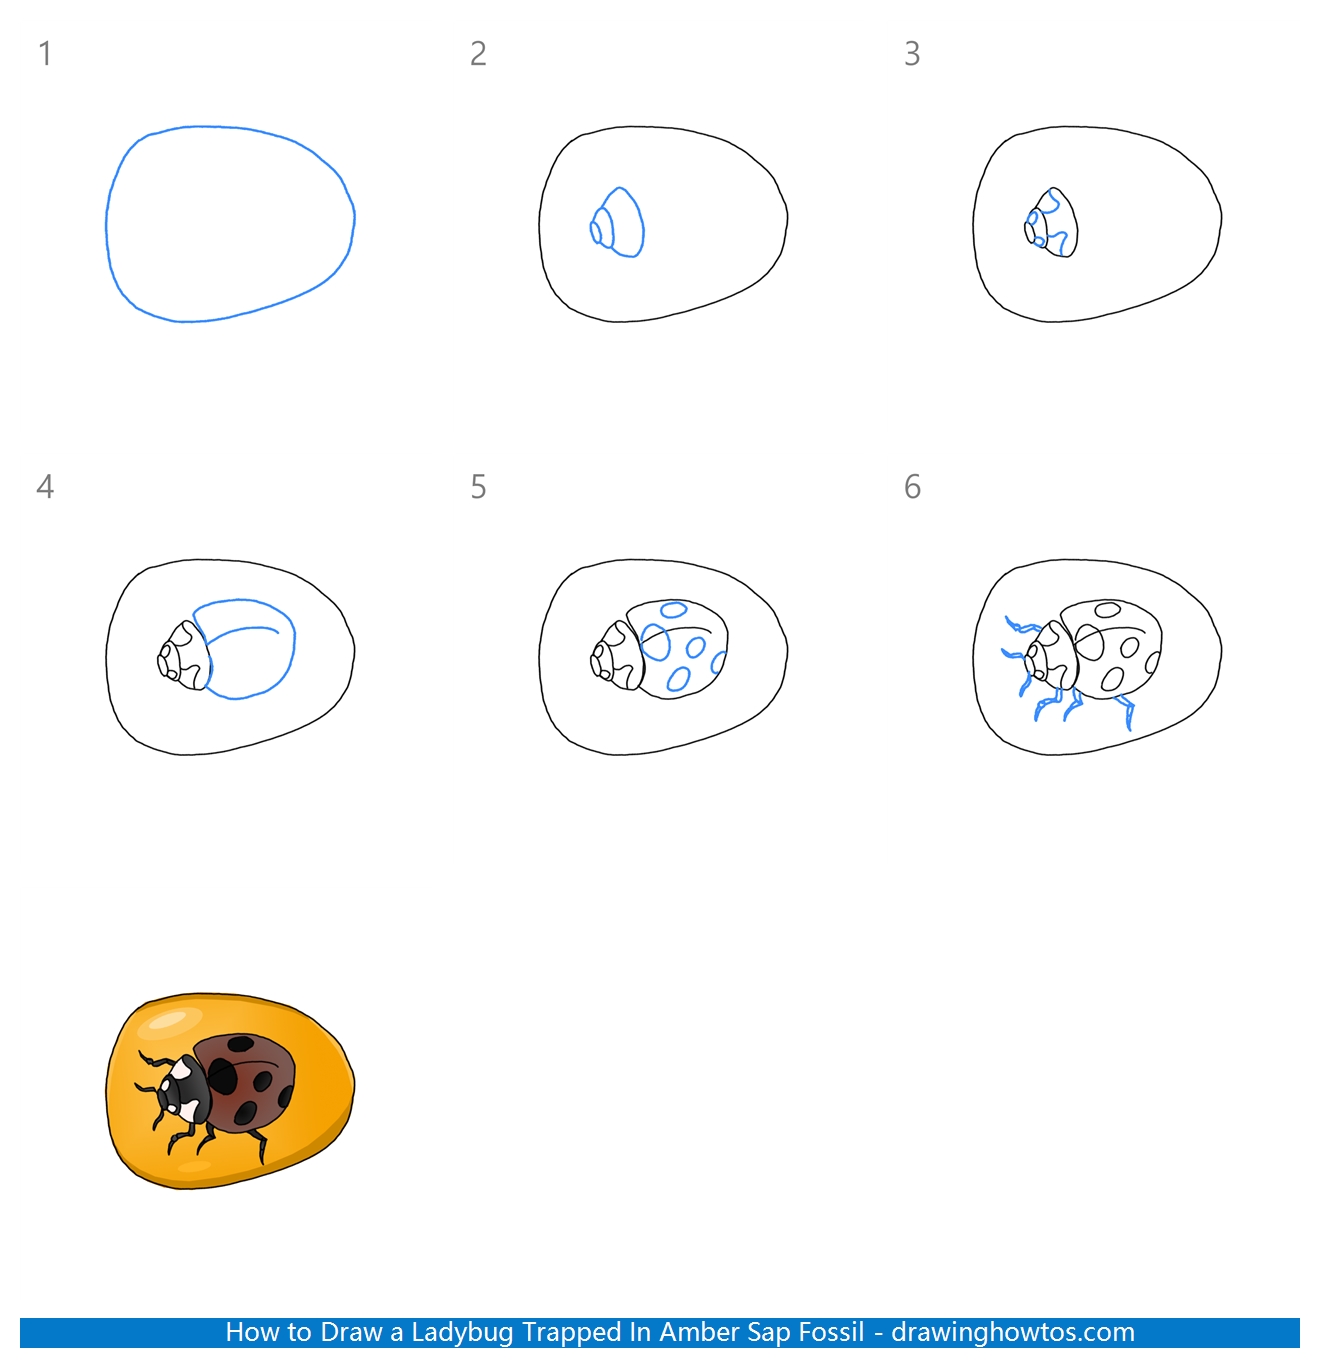 How to Draw a Ladybug Trapped in Amber Sap Fossil Step by Step